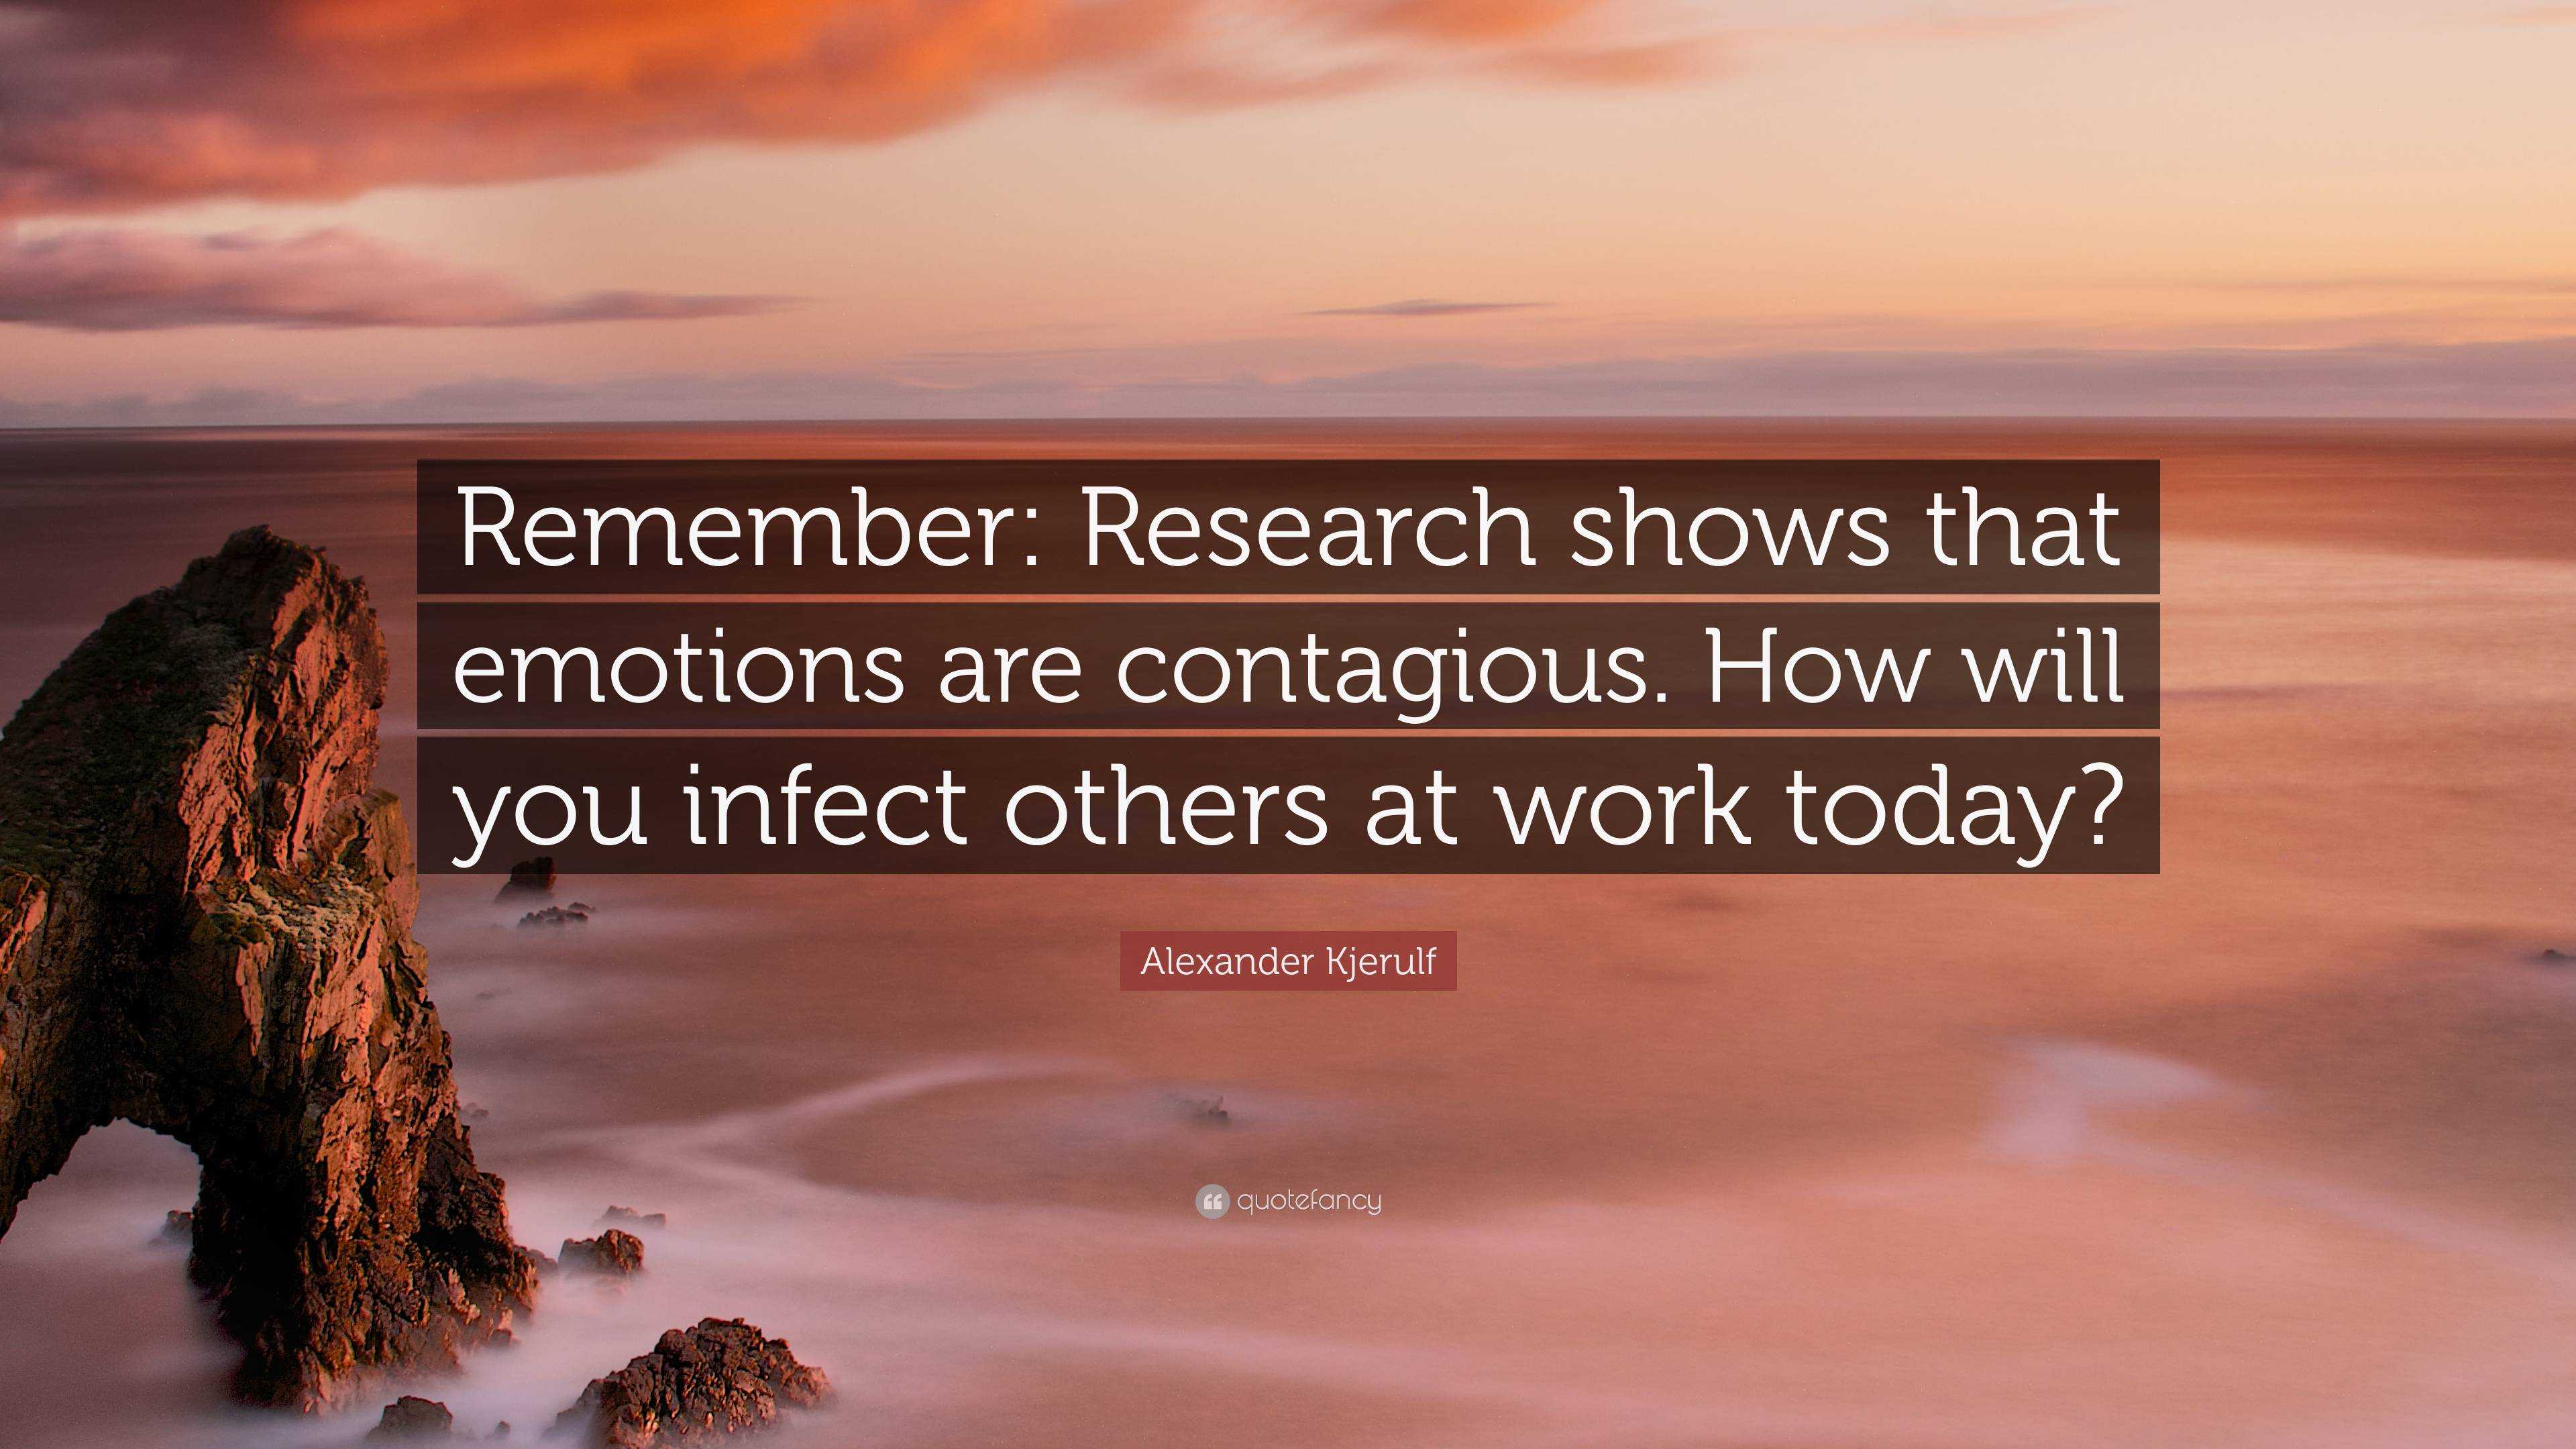 a research has shown emotions are contagious